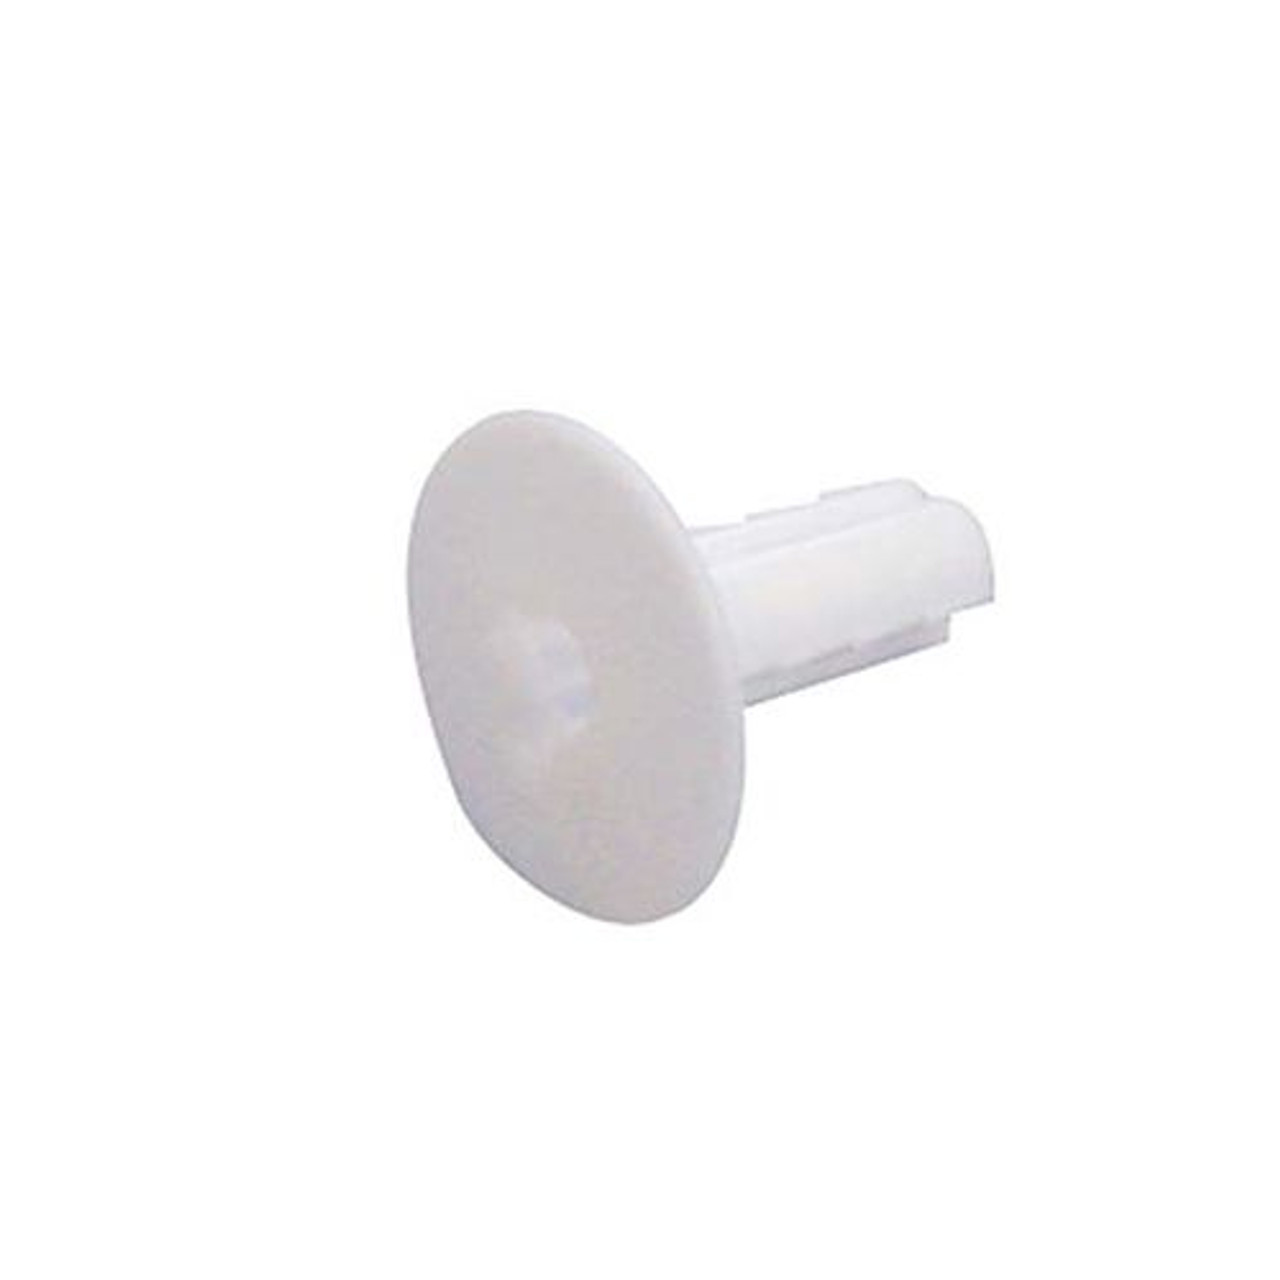 Eagle Feed Thru Wall Bushing White Coaxial 100 Pack With Ground and Messenger Knock Out 7/16" Feed Thru Plug Single Audio Video Speaker Data Wire Organizer Protector